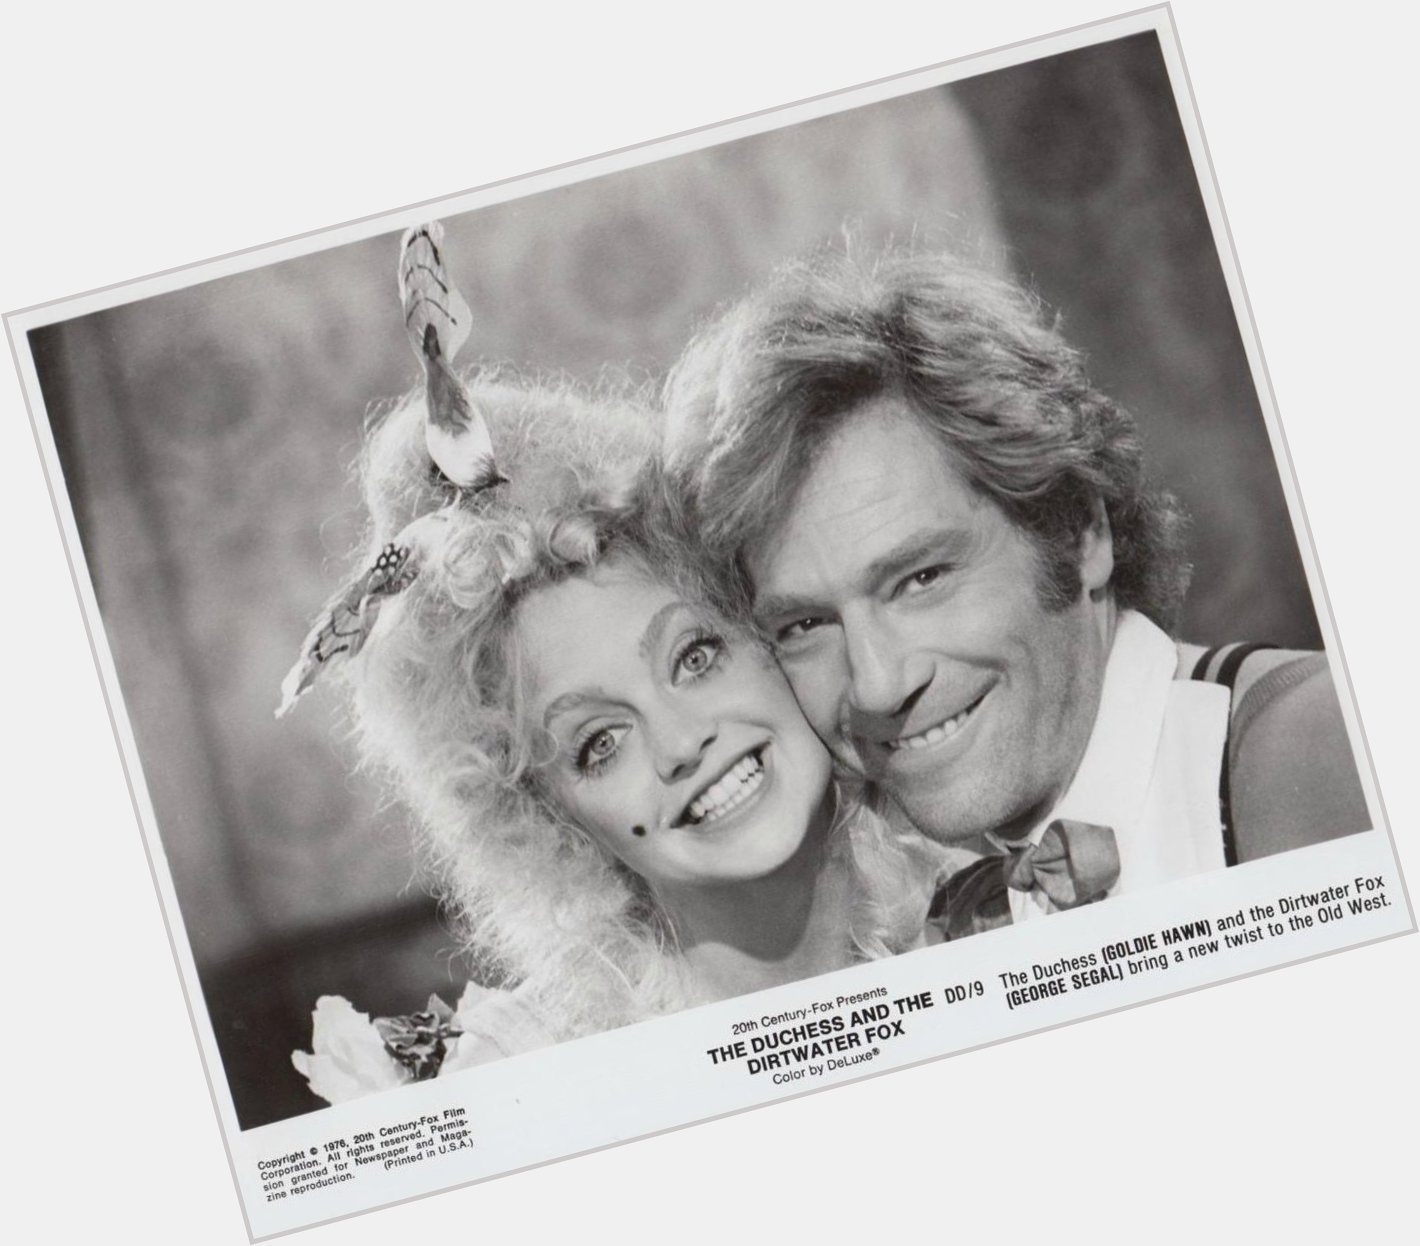 GOLDIE HAWN & GEORGE SEGAL
The Duchess and the Dirtwater Fox (1976)

Happy Birthday to the lovable 